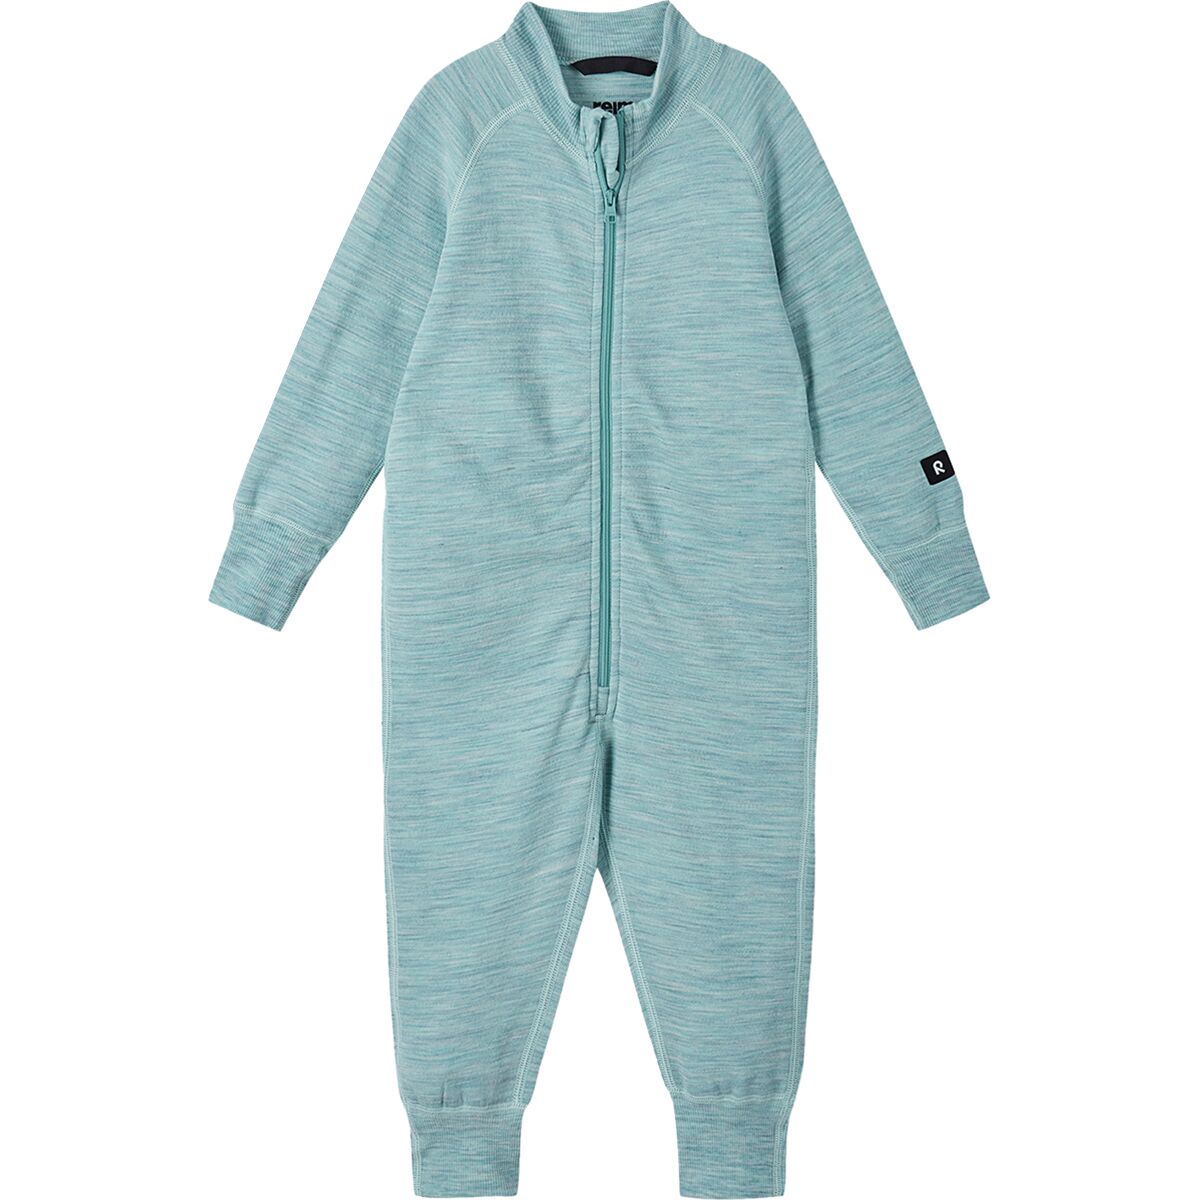 Reima Parvin Wool Coverall - Toddlers' Light Turquoise